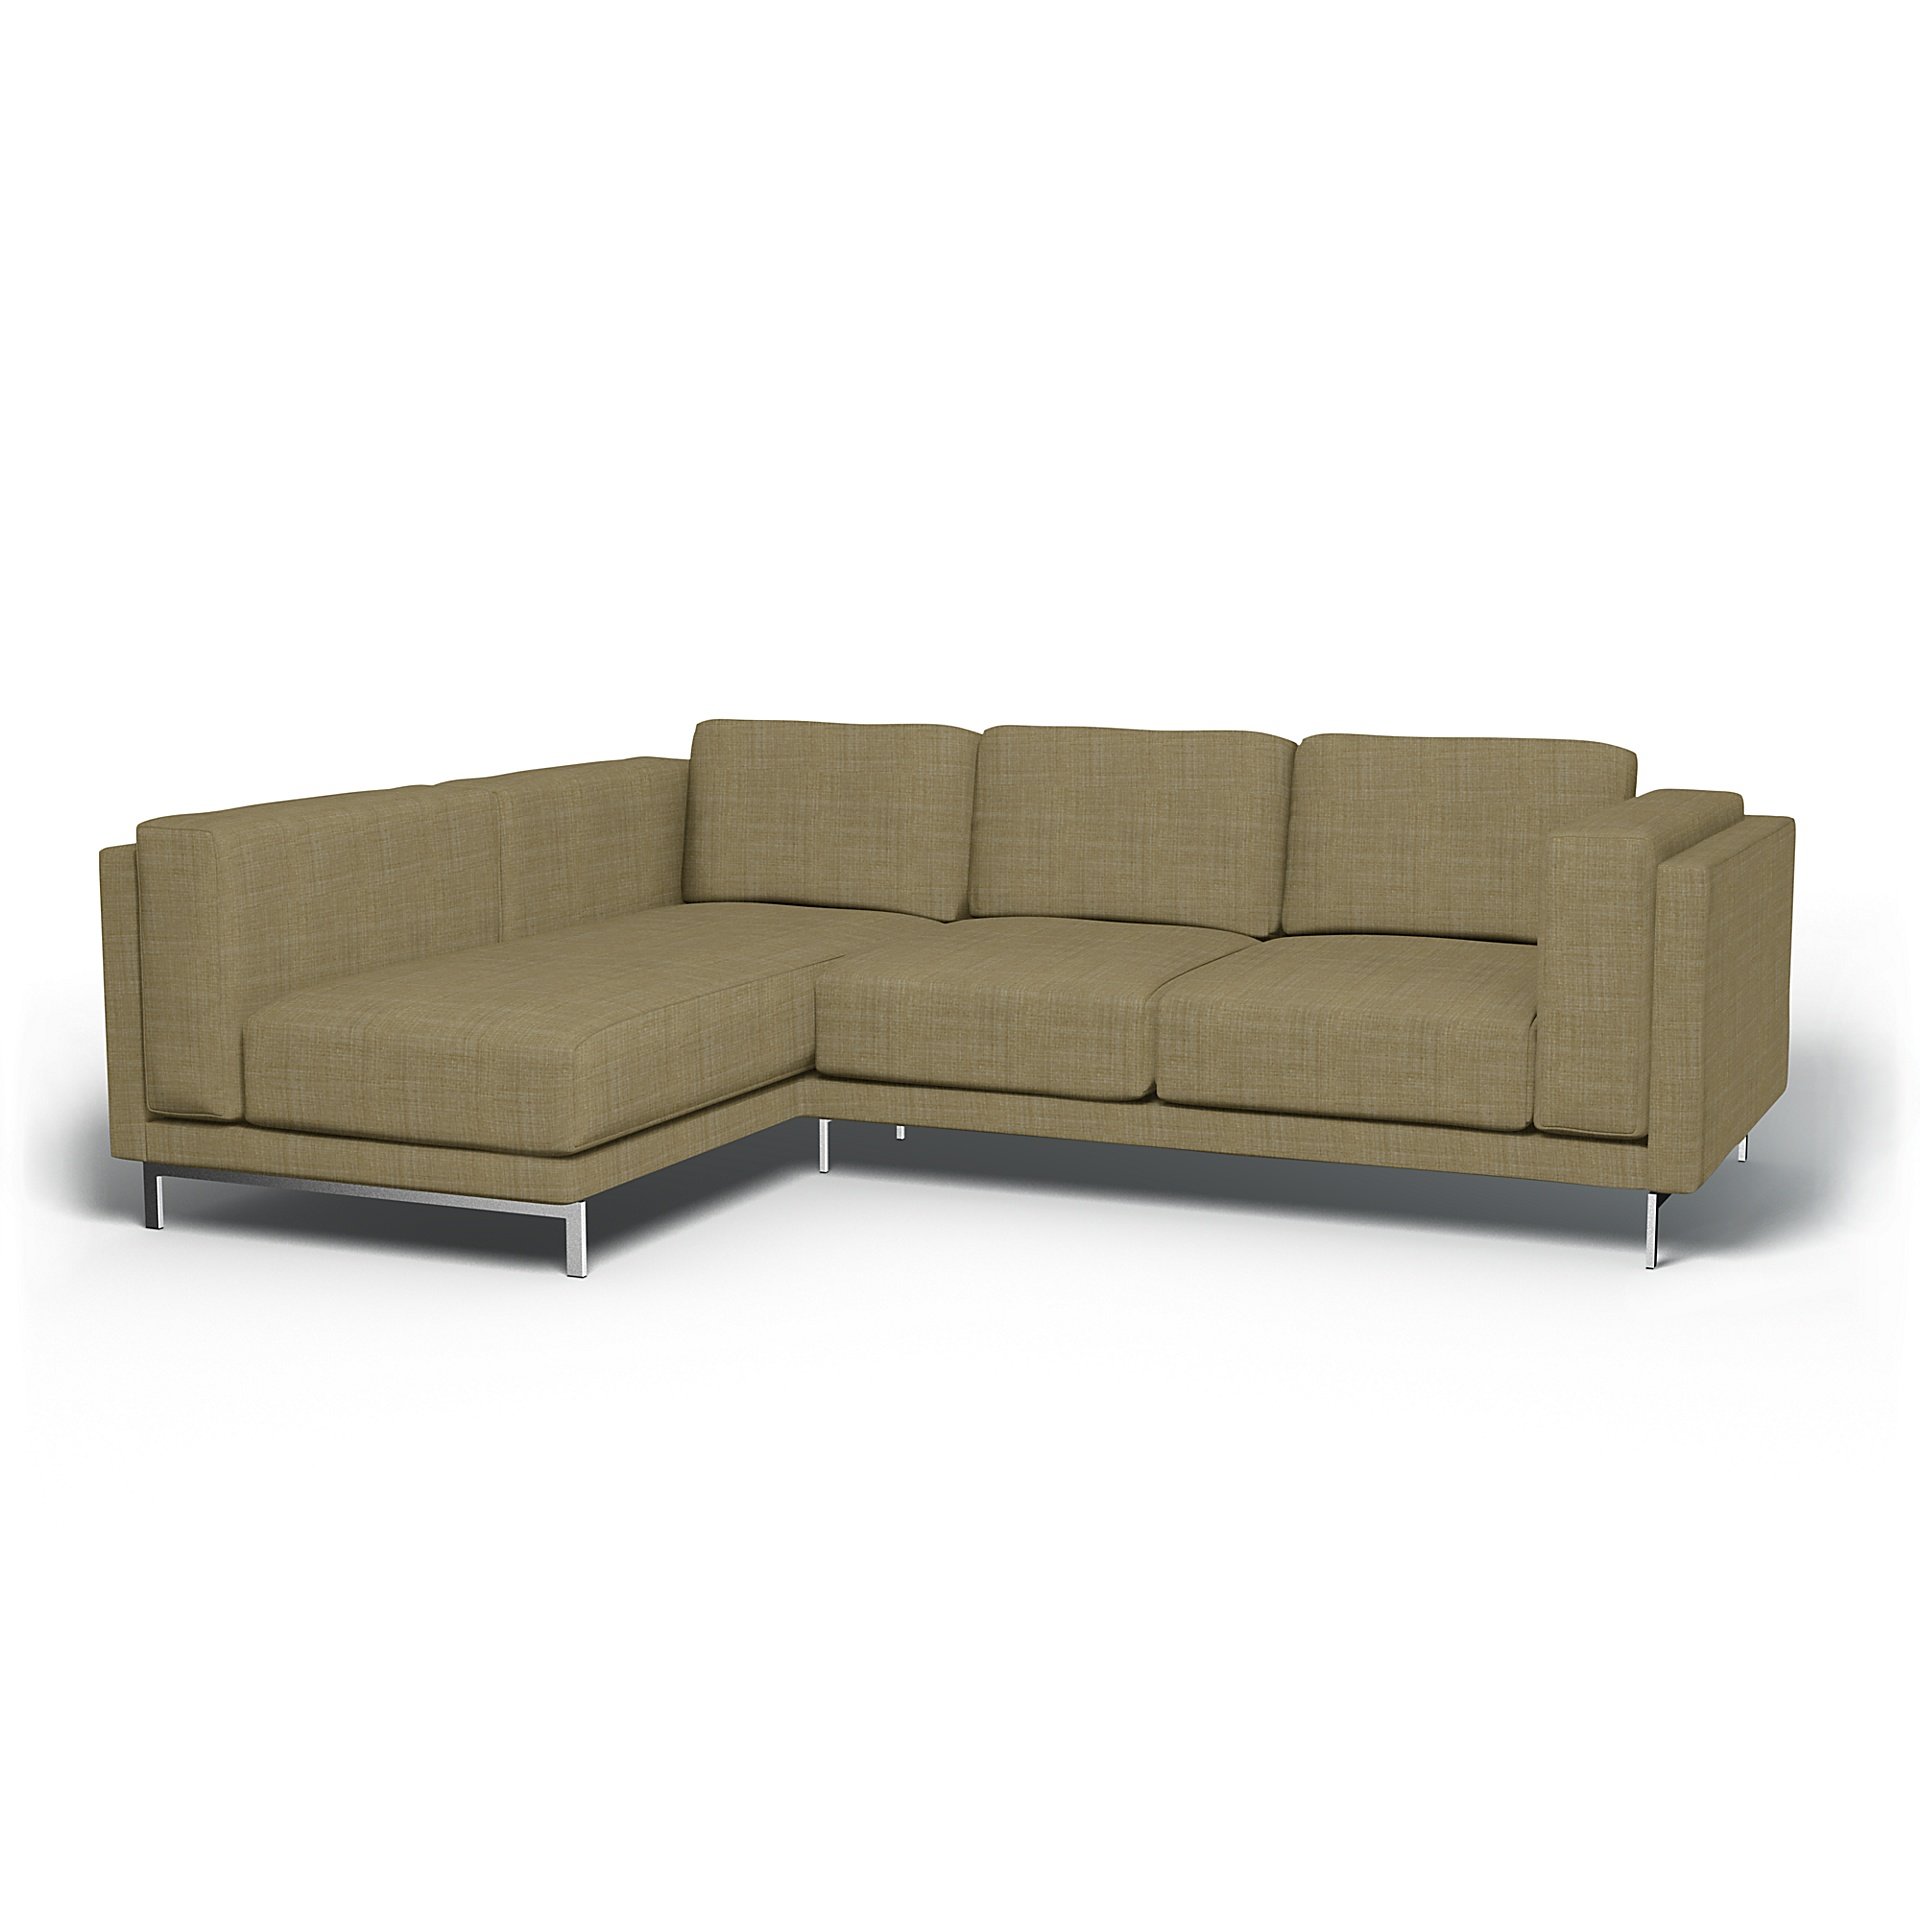 IKEA - Nockeby 3 Seater Sofa with Left Chaise Cover, Dusty Yellow, Boucle & Texture - Bemz